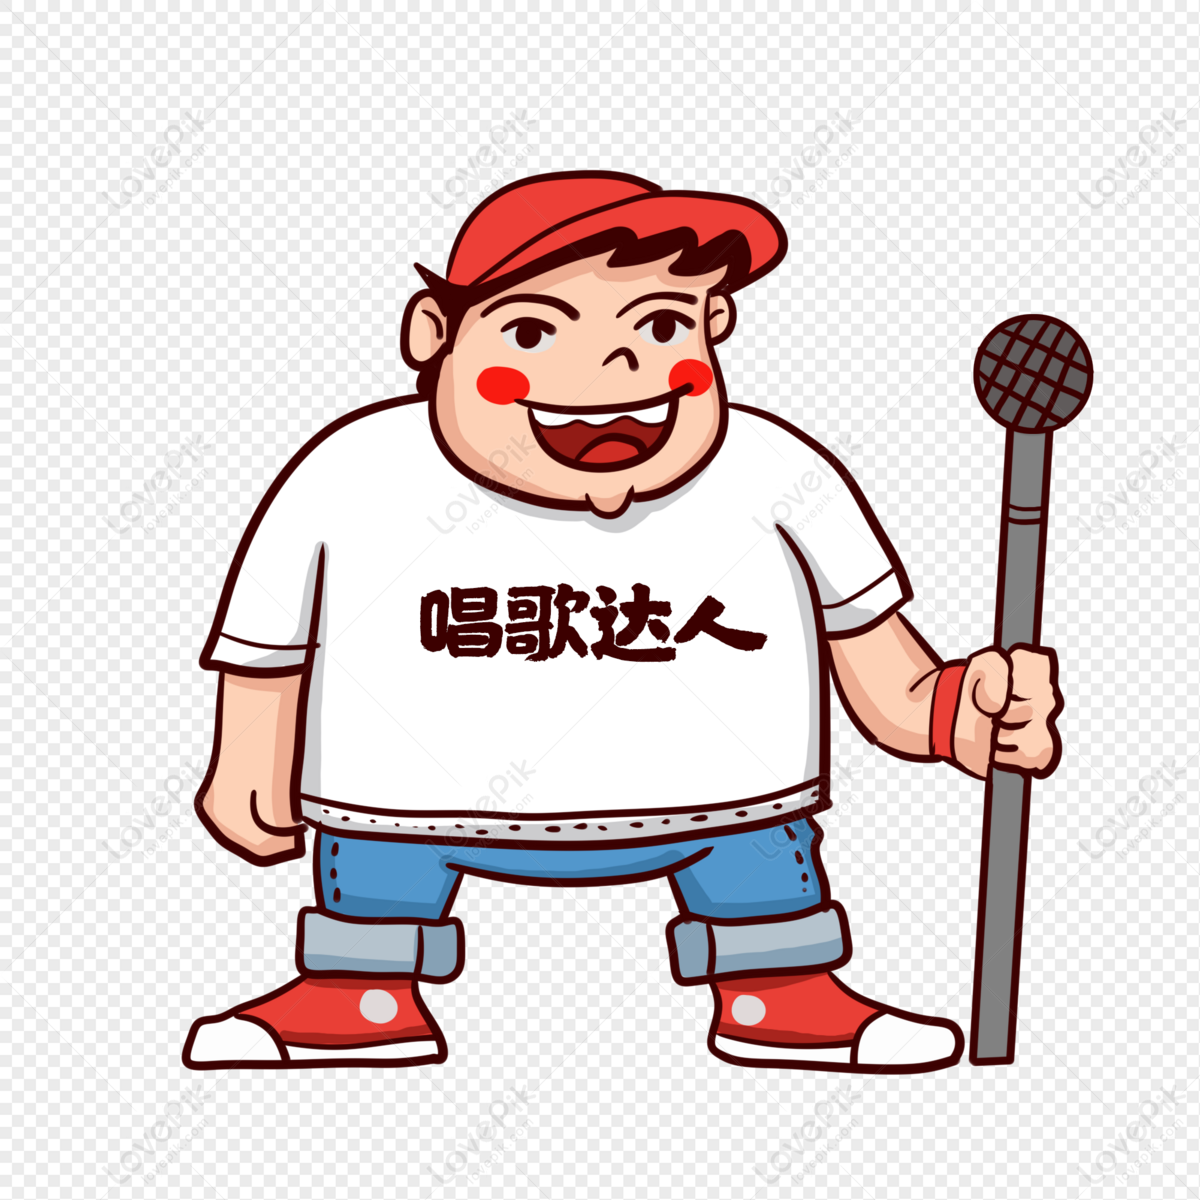 Cartoon Fat Boy Singing Illustration PNG Image Free Download And Clipart  Image For Free Download - Lovepik | 401263231